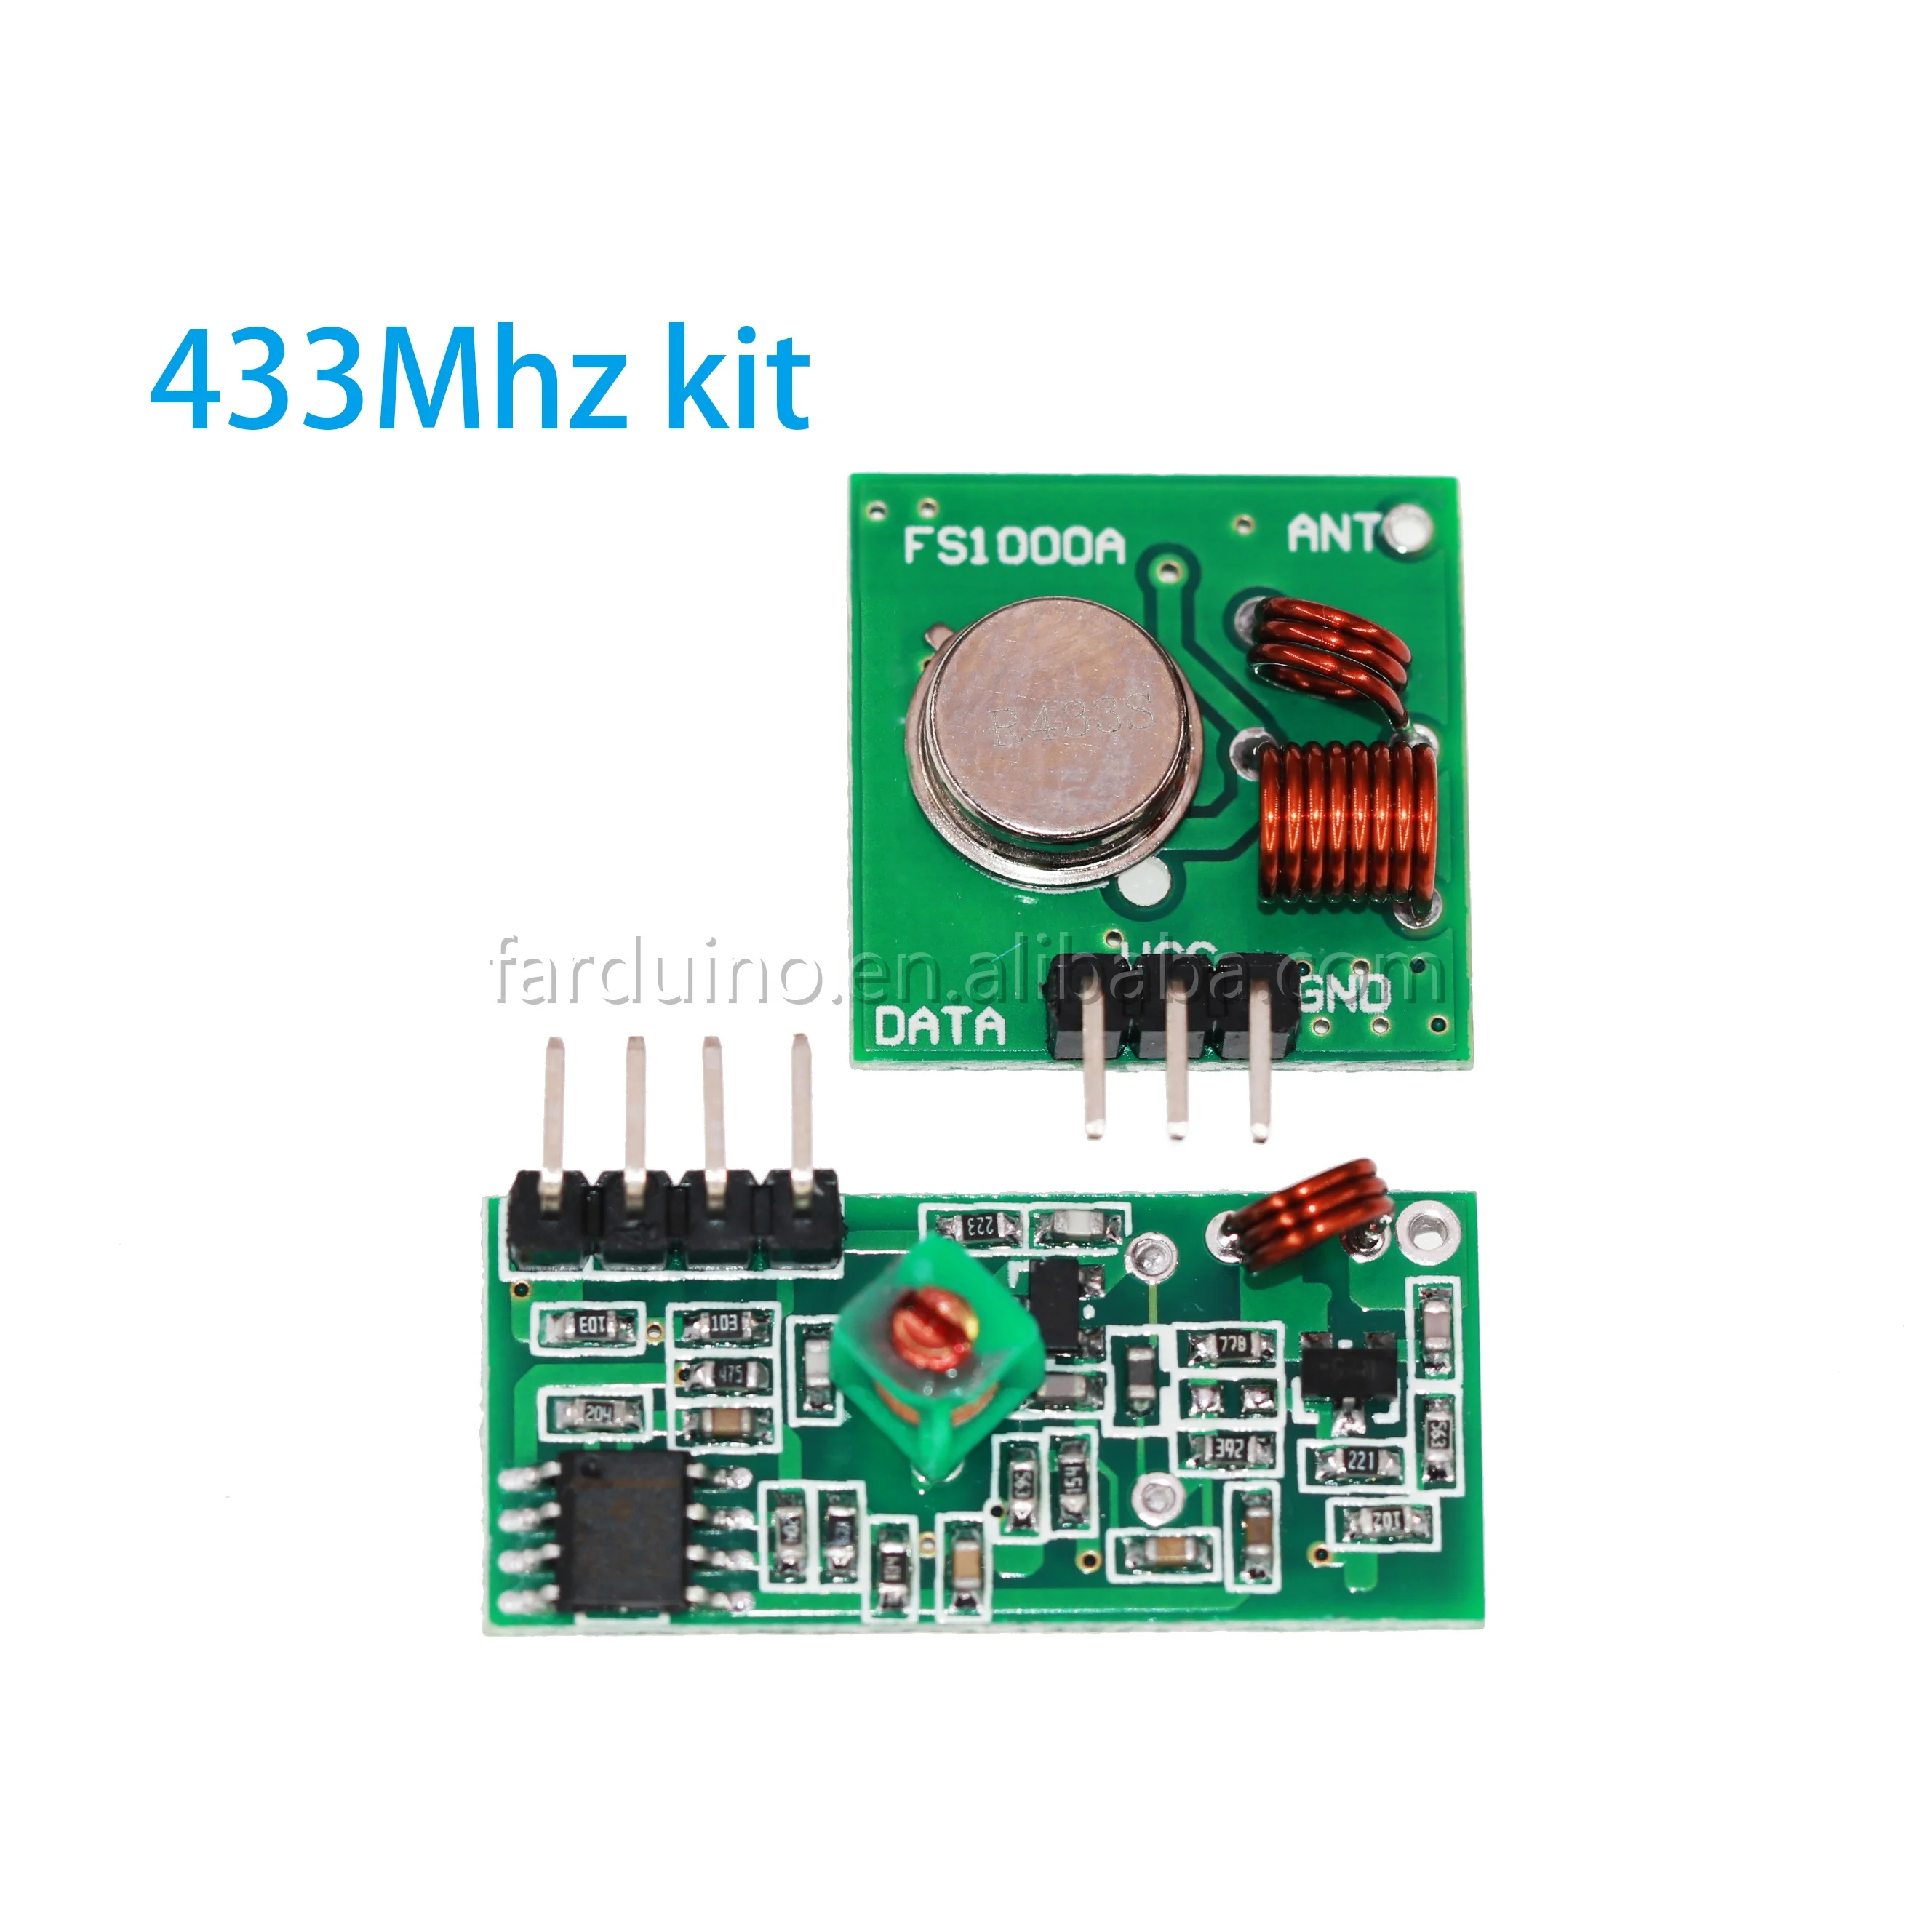 

433Mhz RF Wireless Transmitter Module and Receiver Kit 5V DC Wireless For ARM/MCU WL Diy Kit, Same as picture